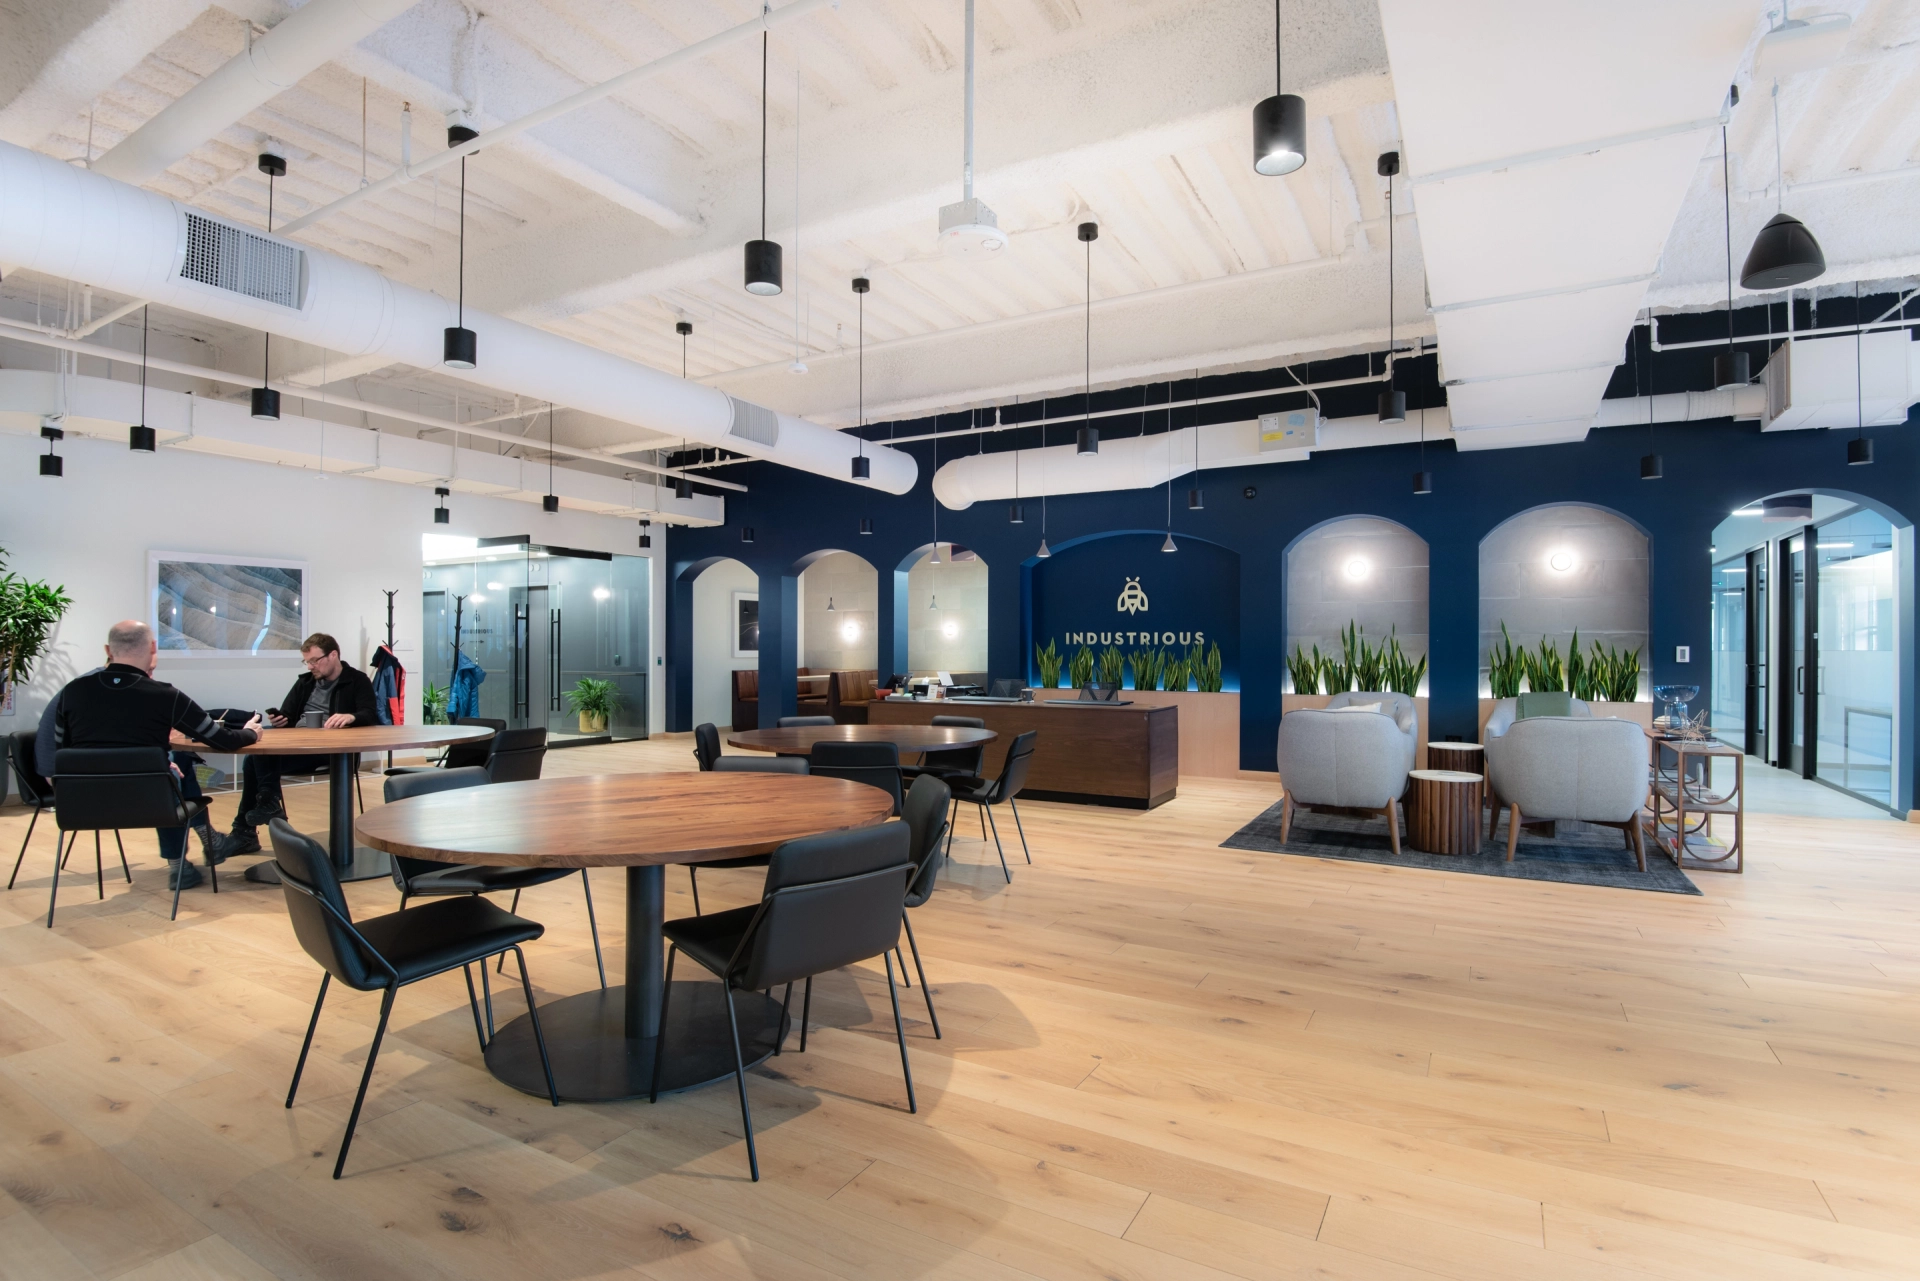 A coworking workspace in Boston with wooden floors and blue walls.